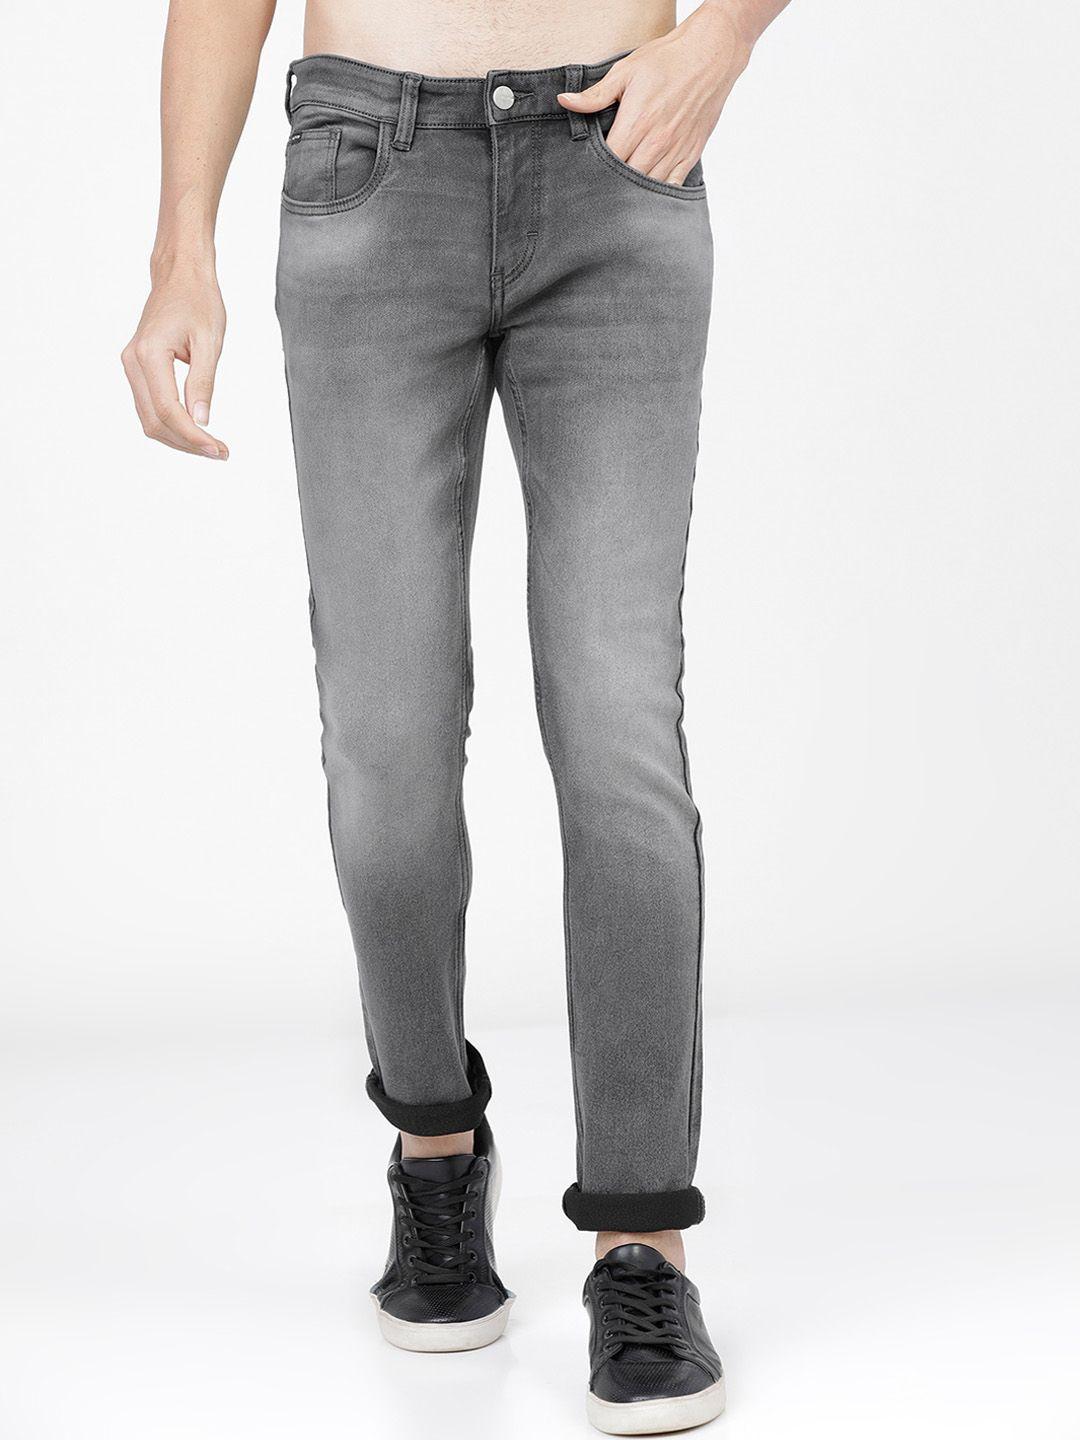 ketch-men-grey-slim-fit-heavy-fade-stretchable-jeans